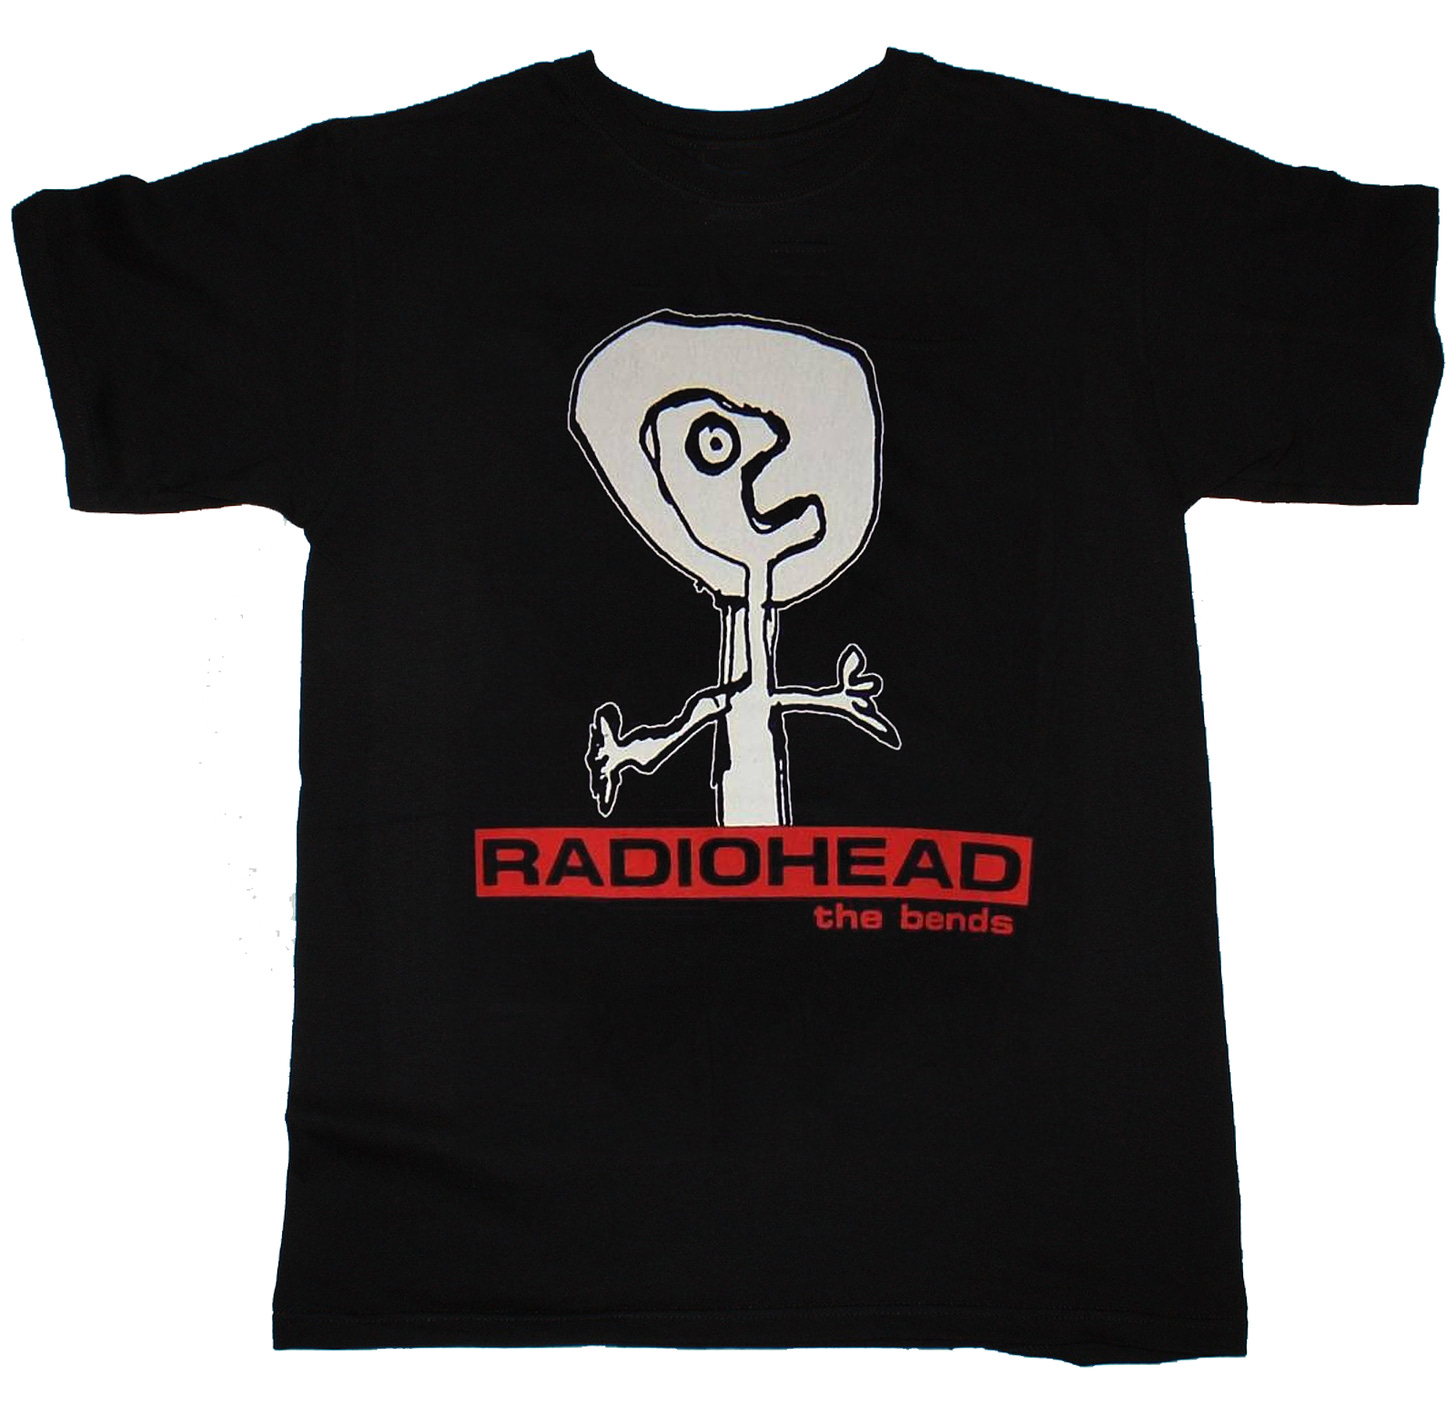 RADIOHEAD The Bends T-shirt Unisex Black Cotton Rock Music Vintage Tee S-2345XL - Picture 1 of 9